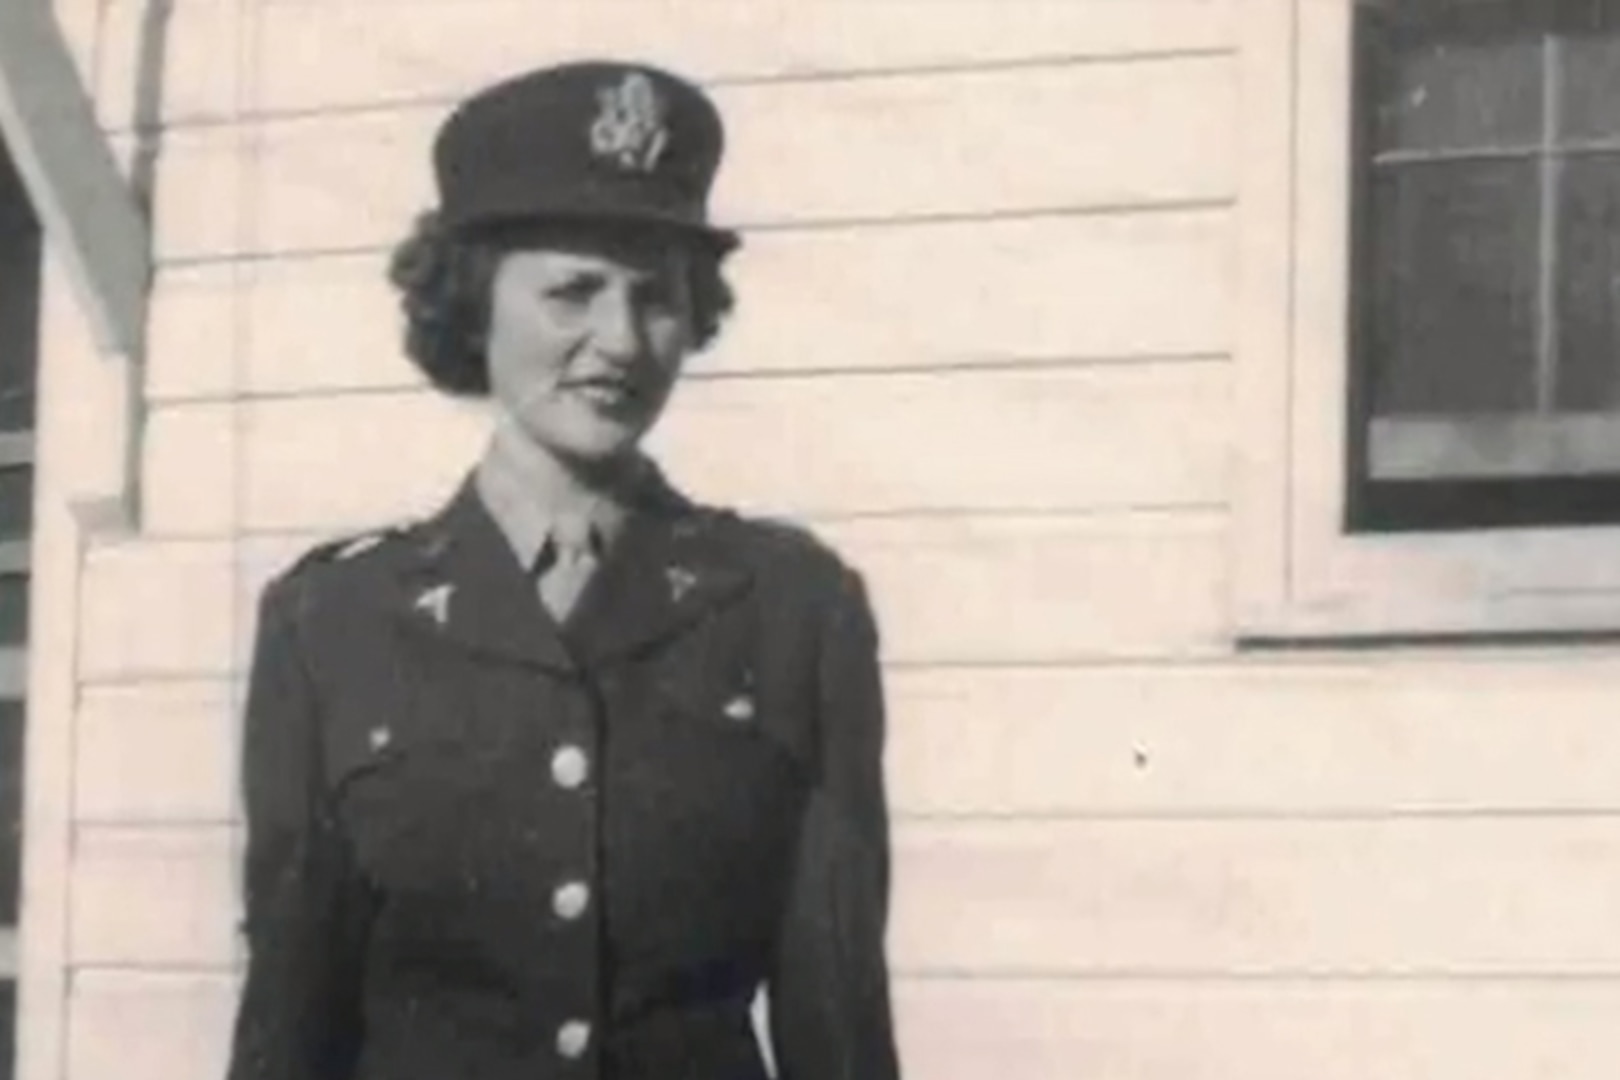 A woman wearing a military uniform poses for a photo.